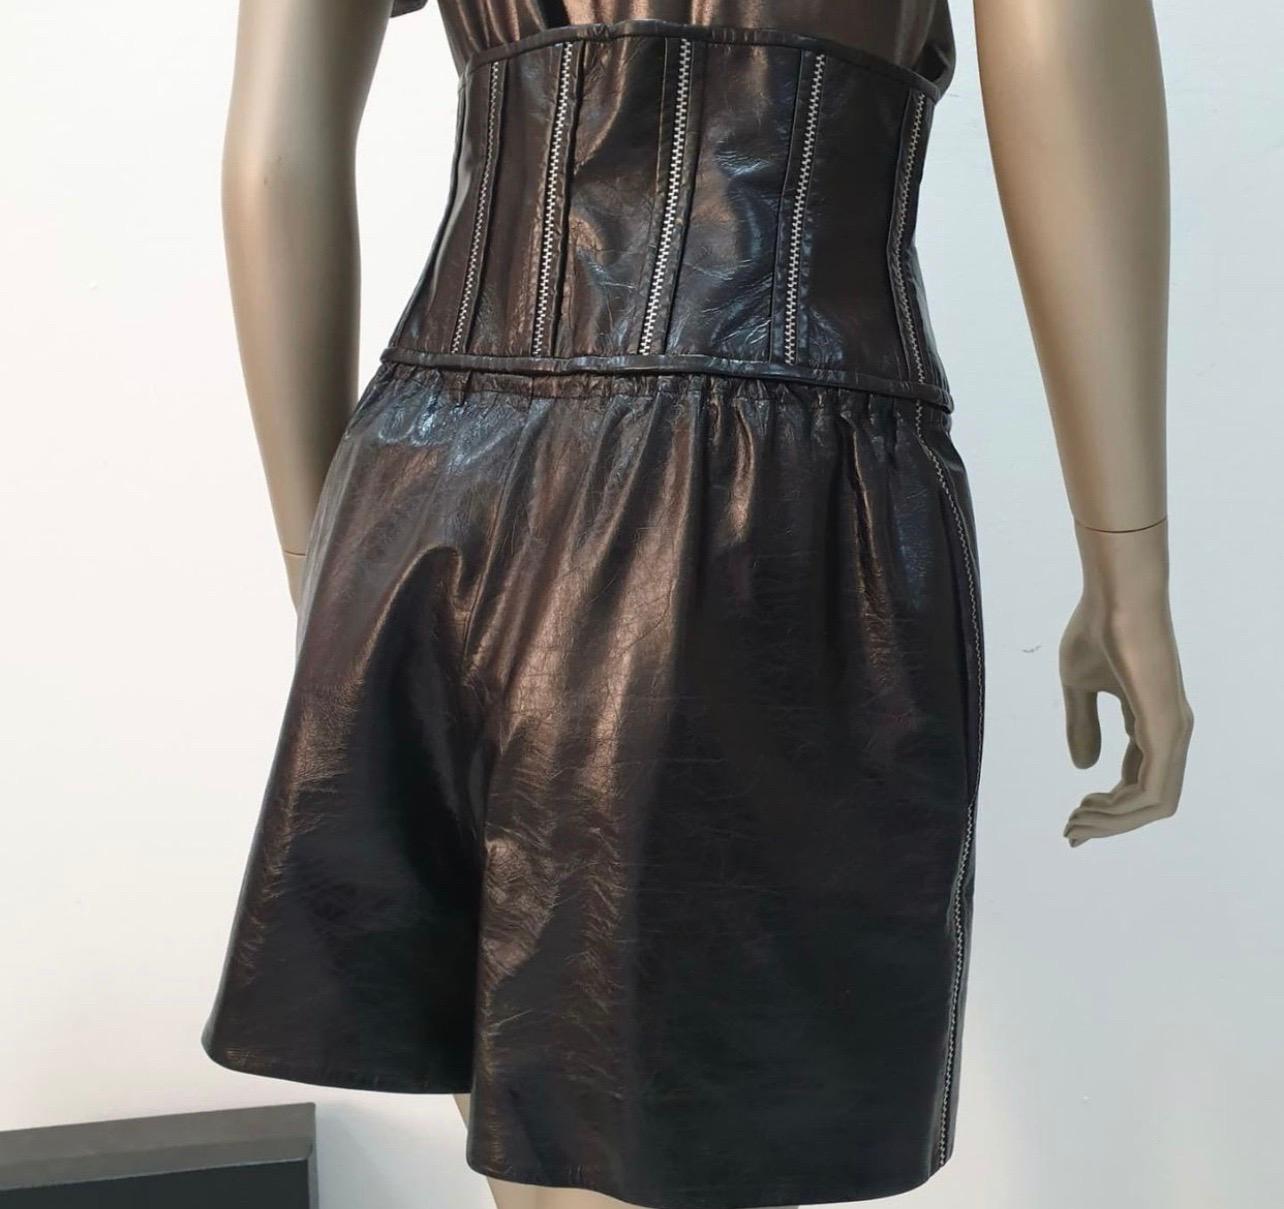 Chanel Black Leather Shorts
Sz.38
High Waist.
Zipper decoration.
Condition is very good.
